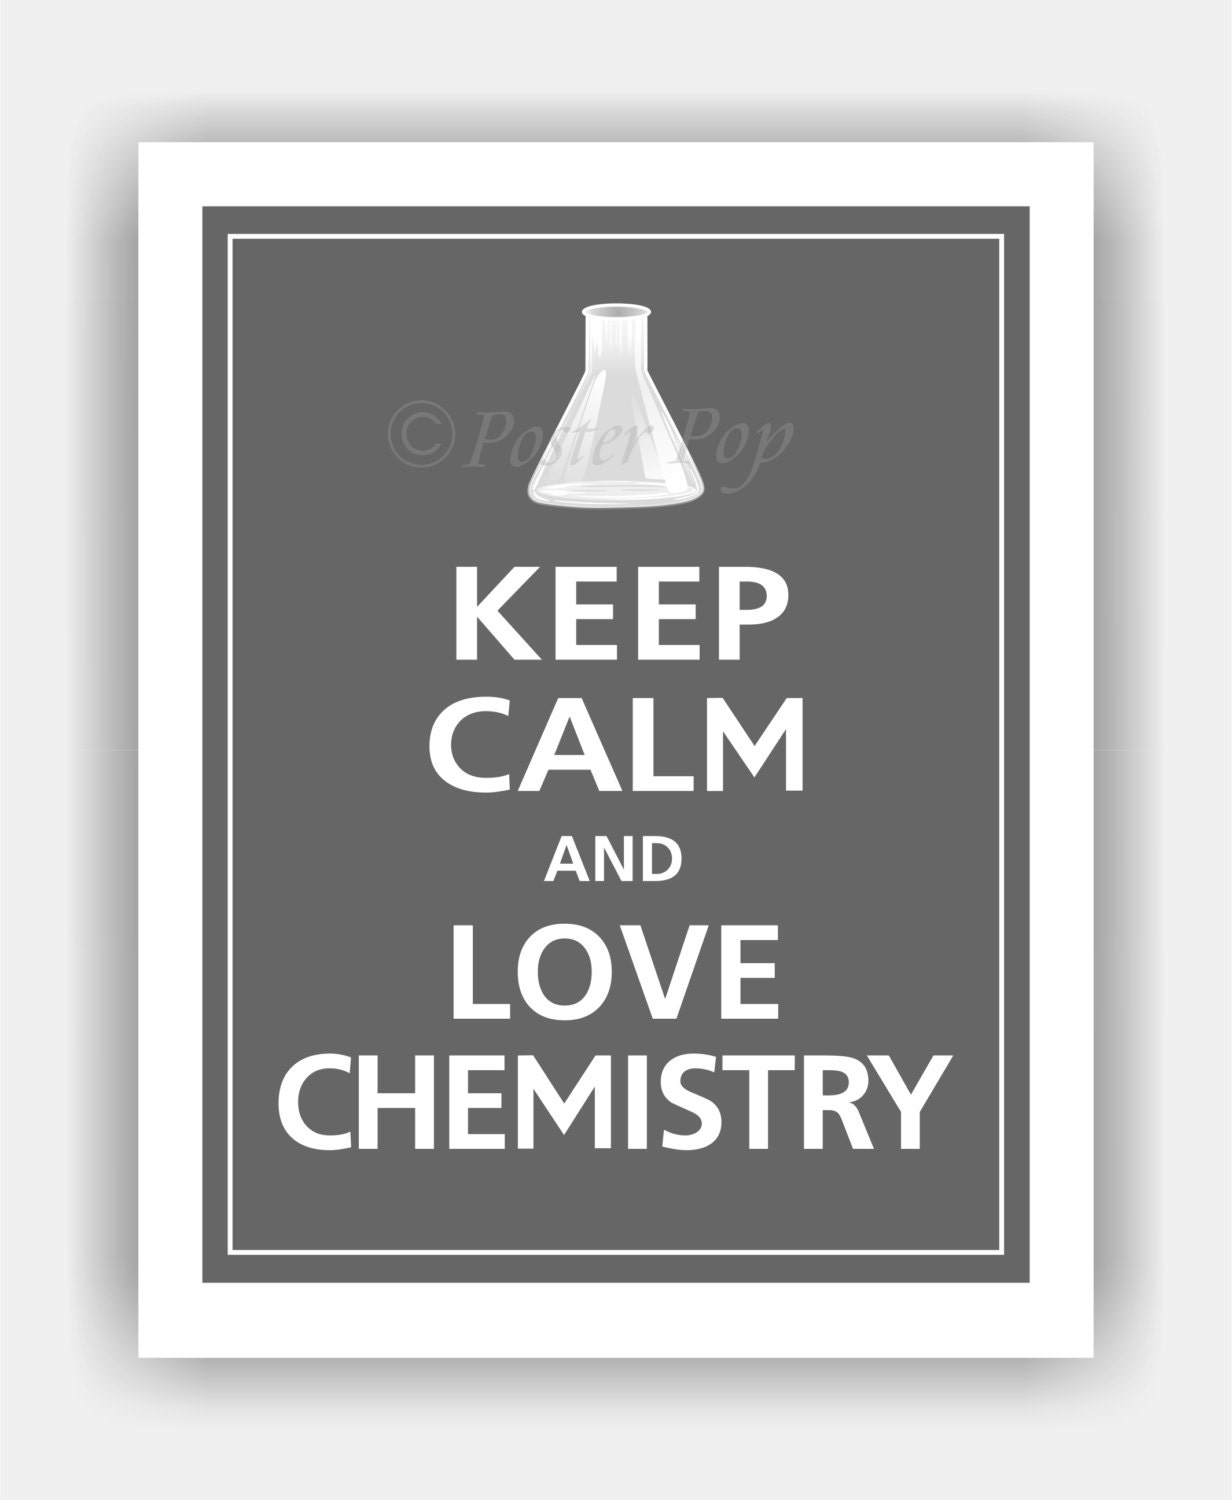 Keep Calm And Love Chemistry Print 8x10 Color By Posterpop On Etsy